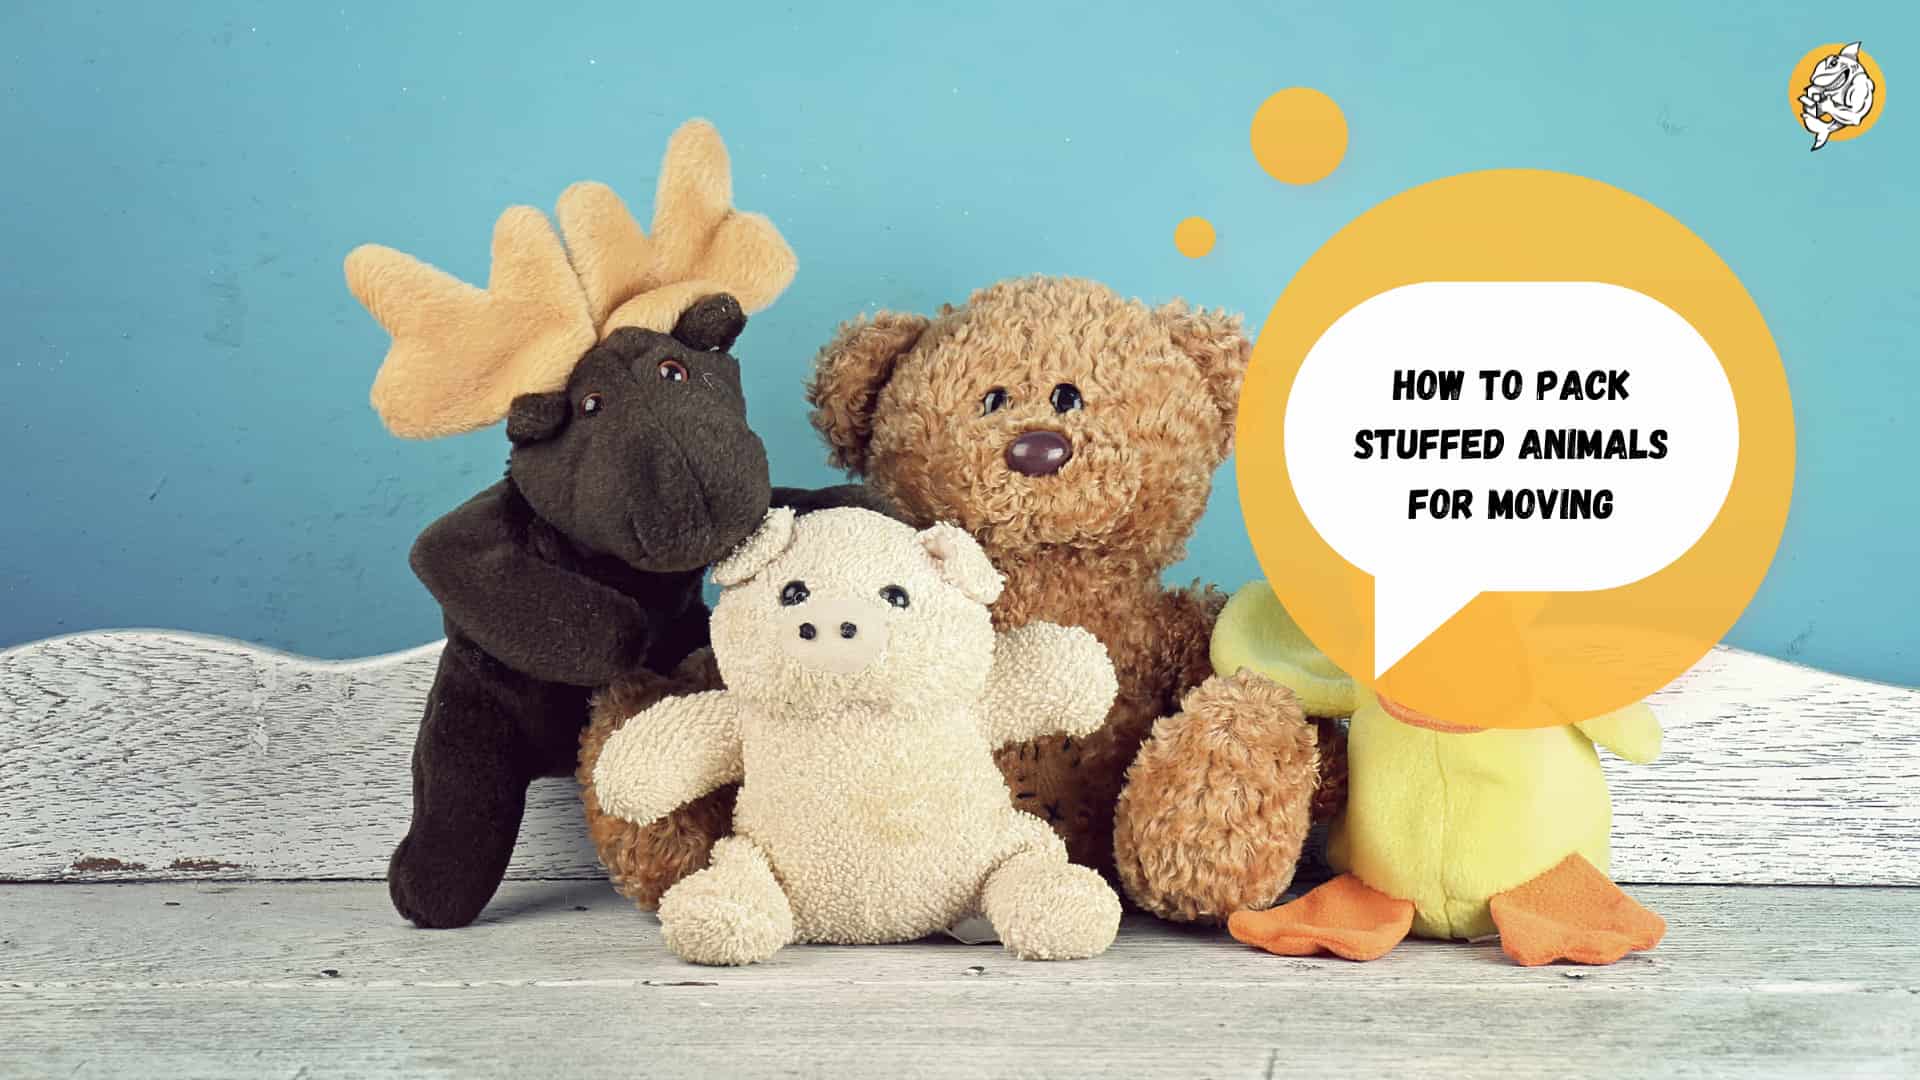 How to Pack Stuffed Animals for Moving